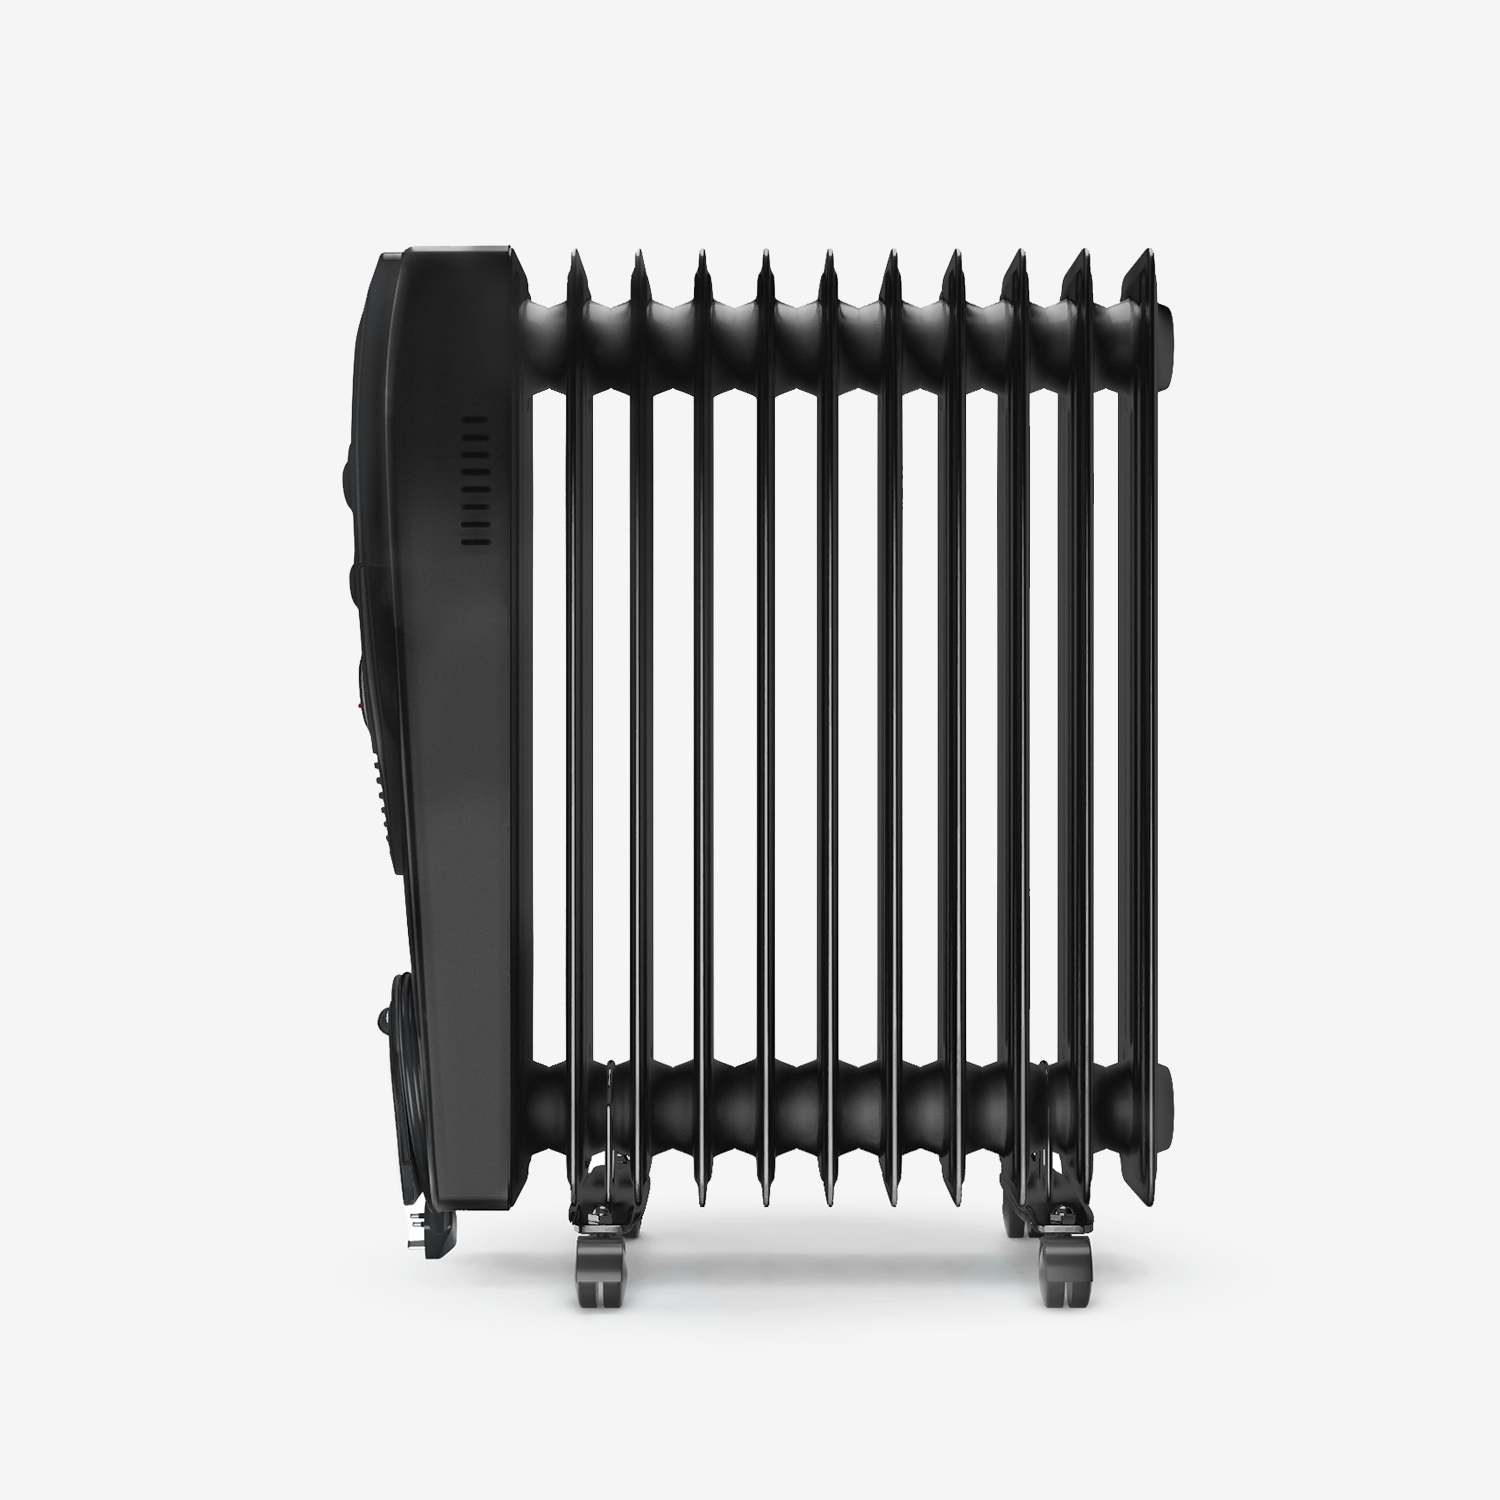 2500W Oil Filled Radiator with 11 Fins - Black